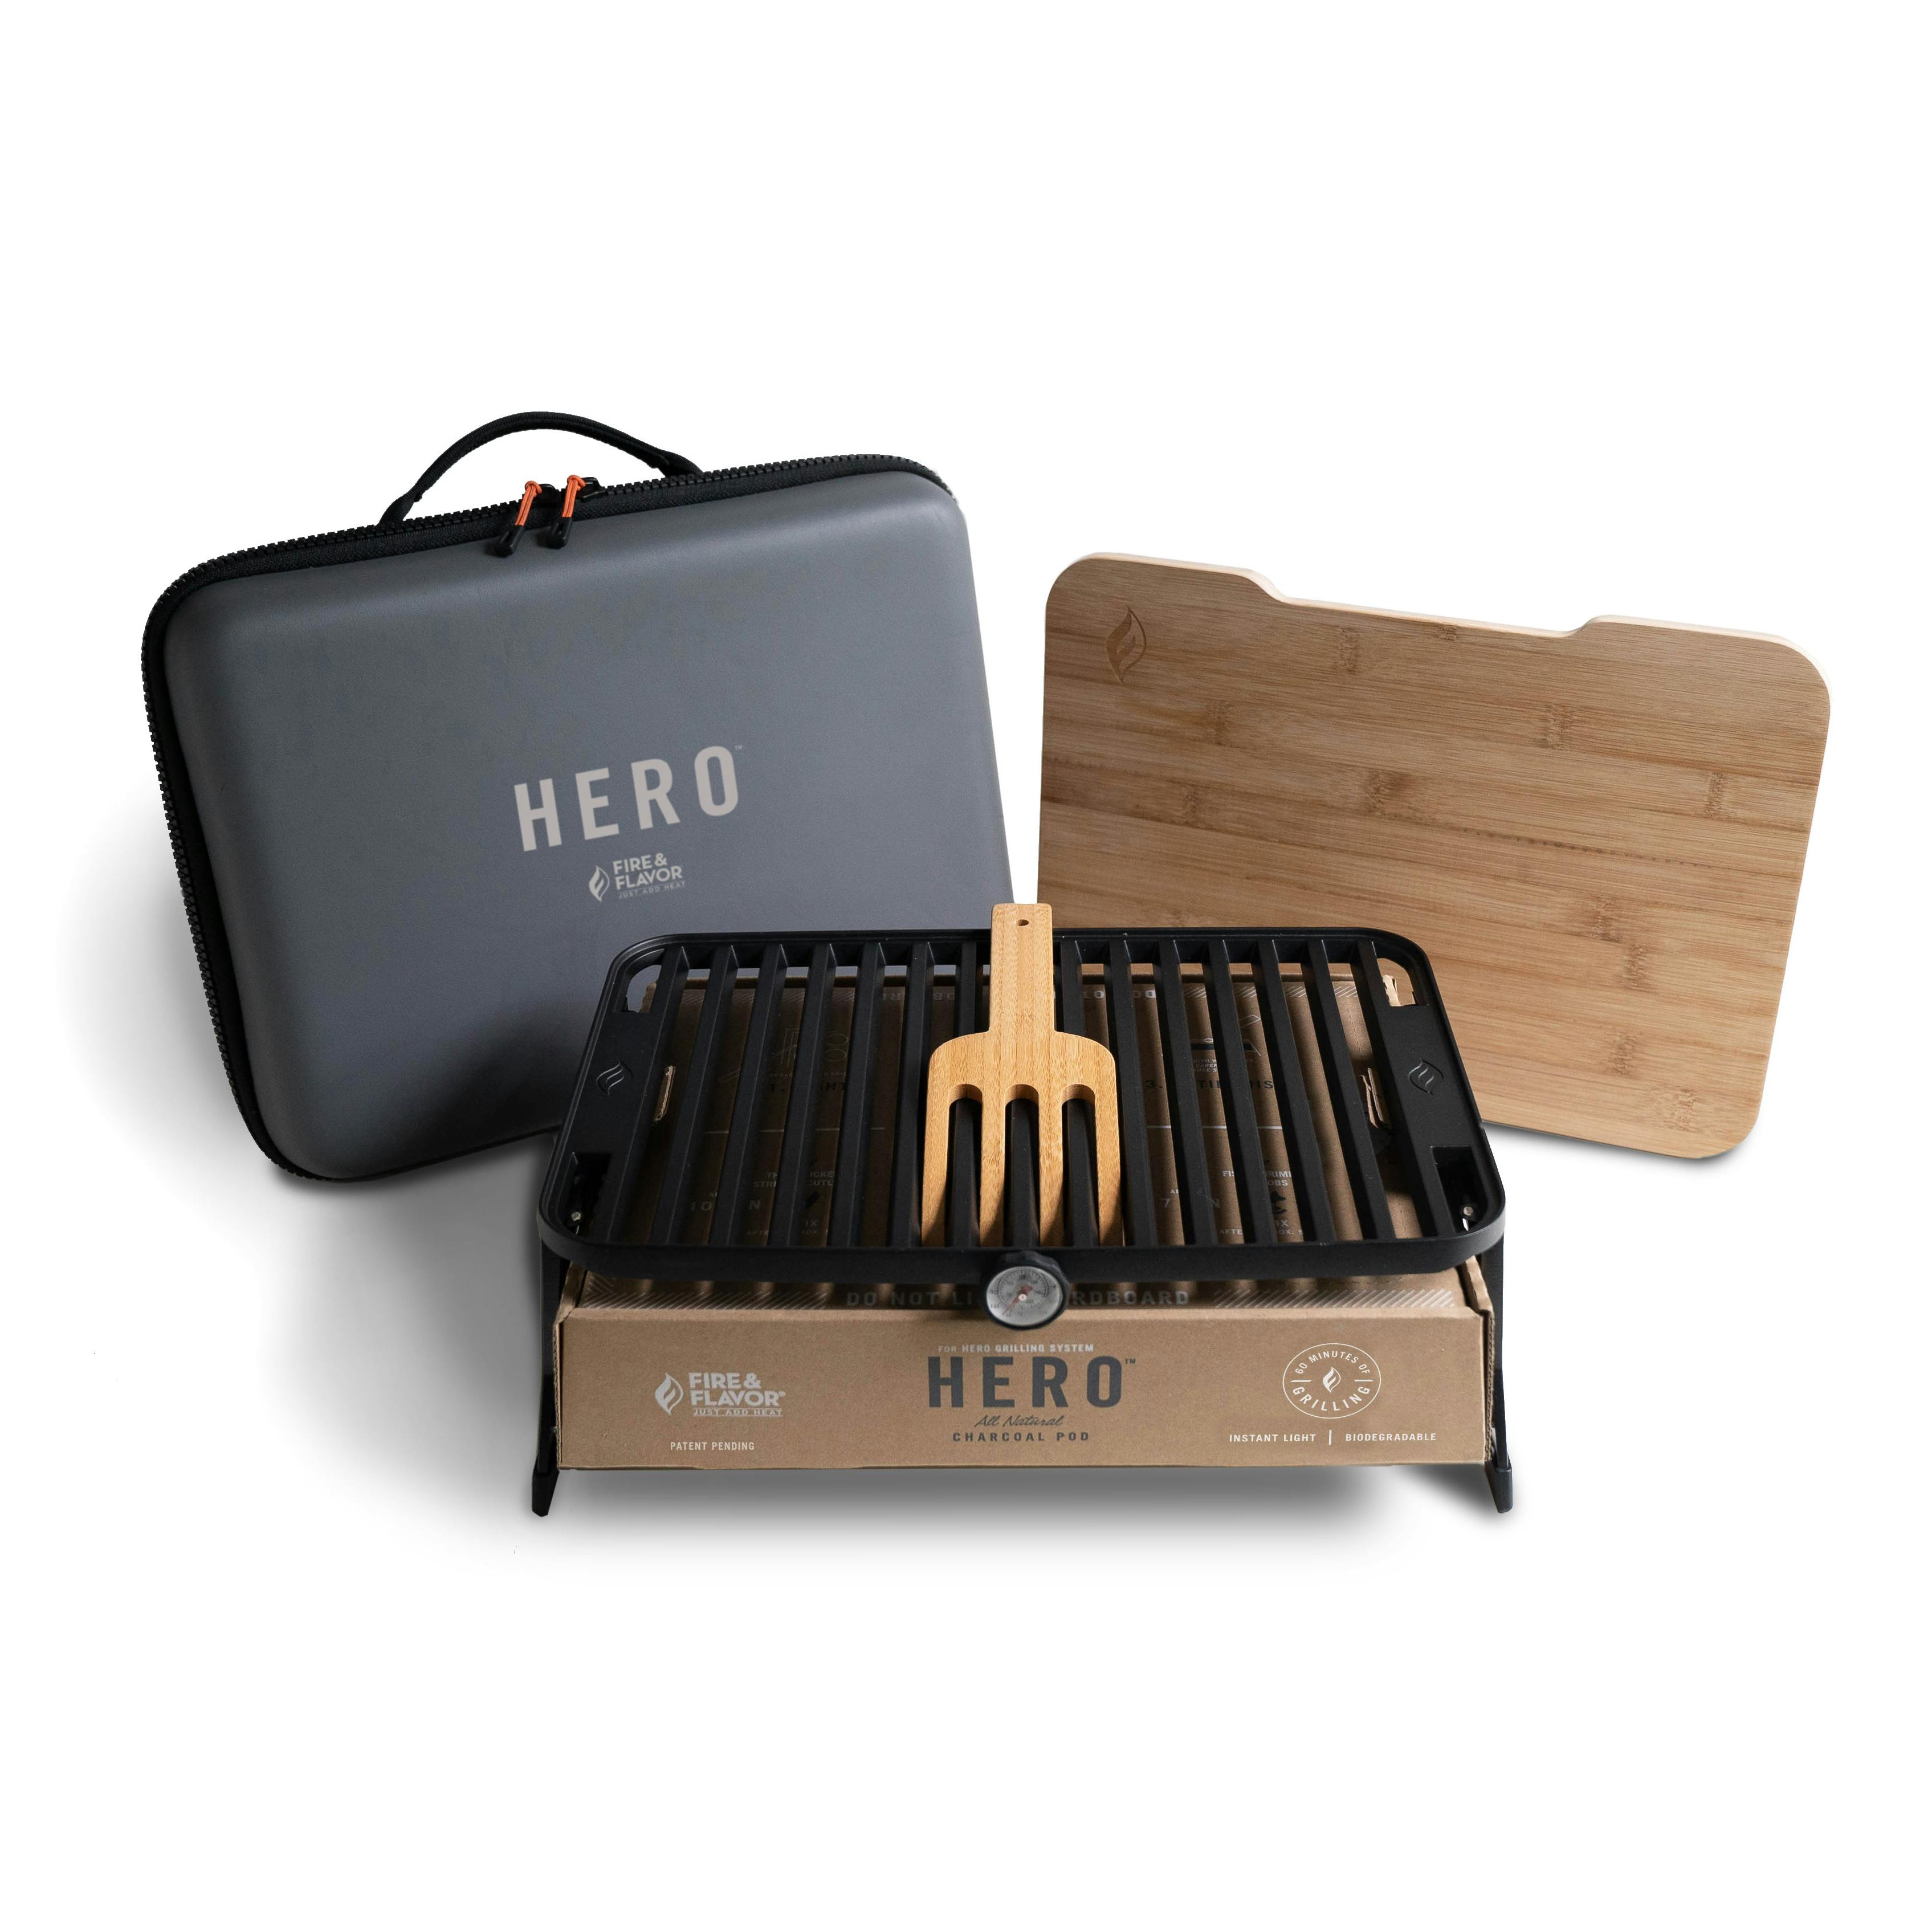 Hero Grill System - Portable Eco-Friendly Outdoor Grill + Case